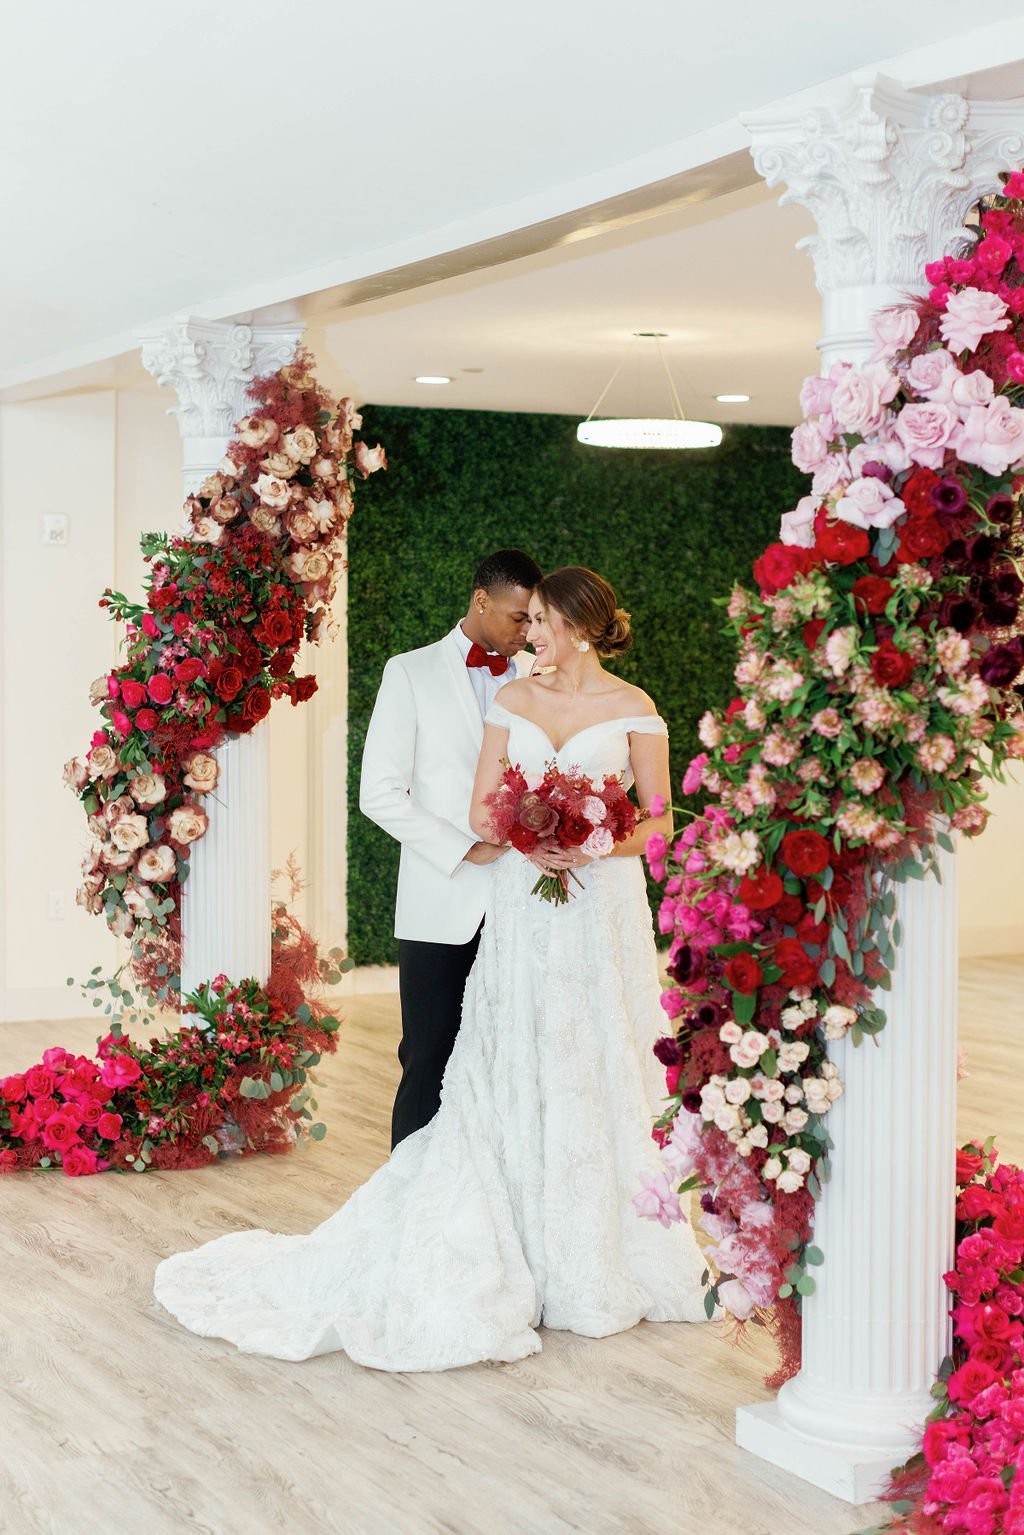 A bride and groom pose for formal photos in front of stunning flower arrangements wrapping around columns